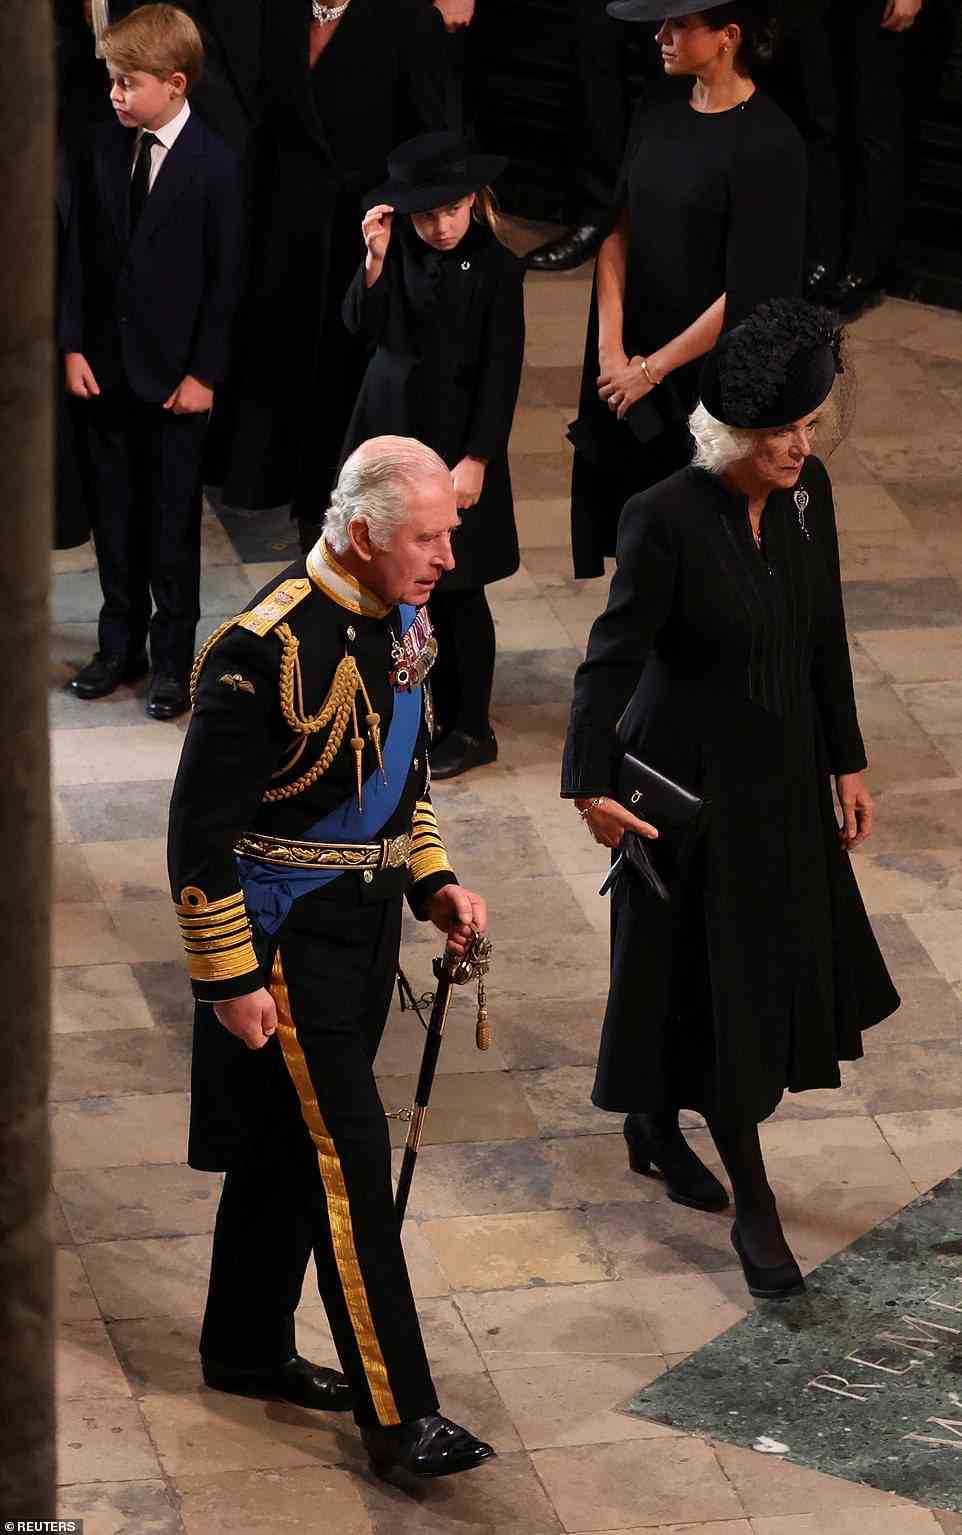 King Charles III and the Queen Consort looked grave as they walked in unison to the front row, to take their seat ahead of the ceremony